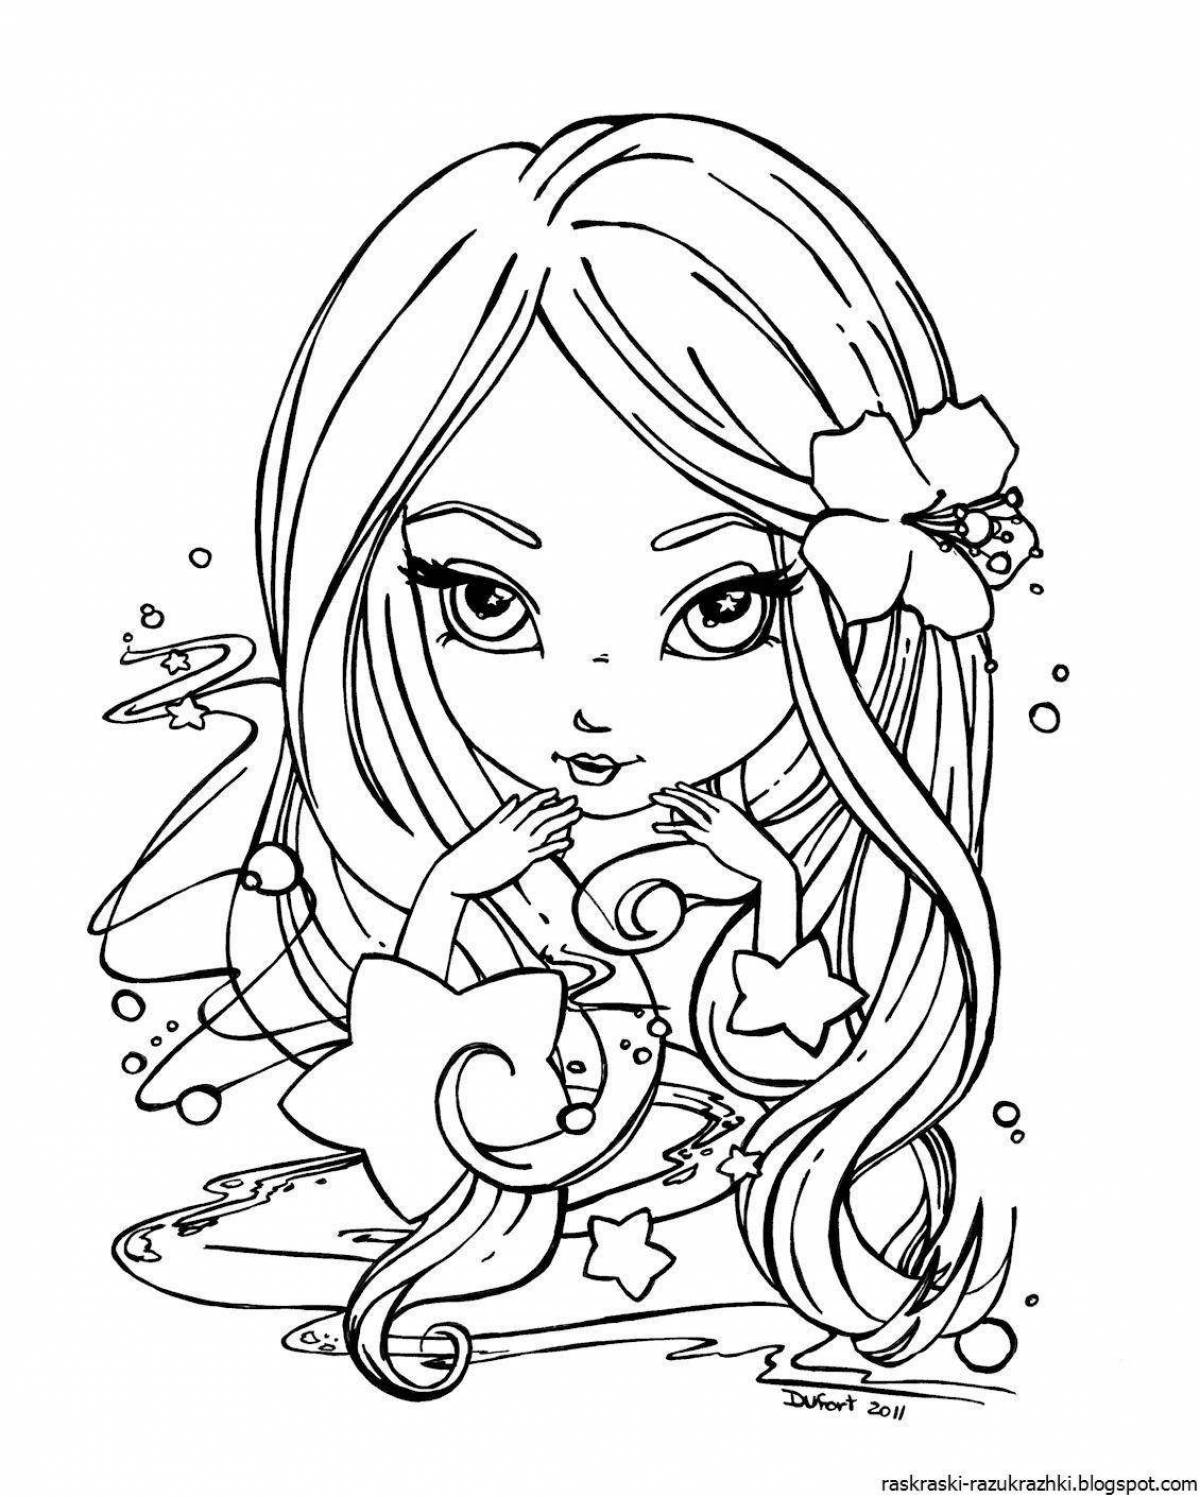 Sparkling coloring pages funny for girls